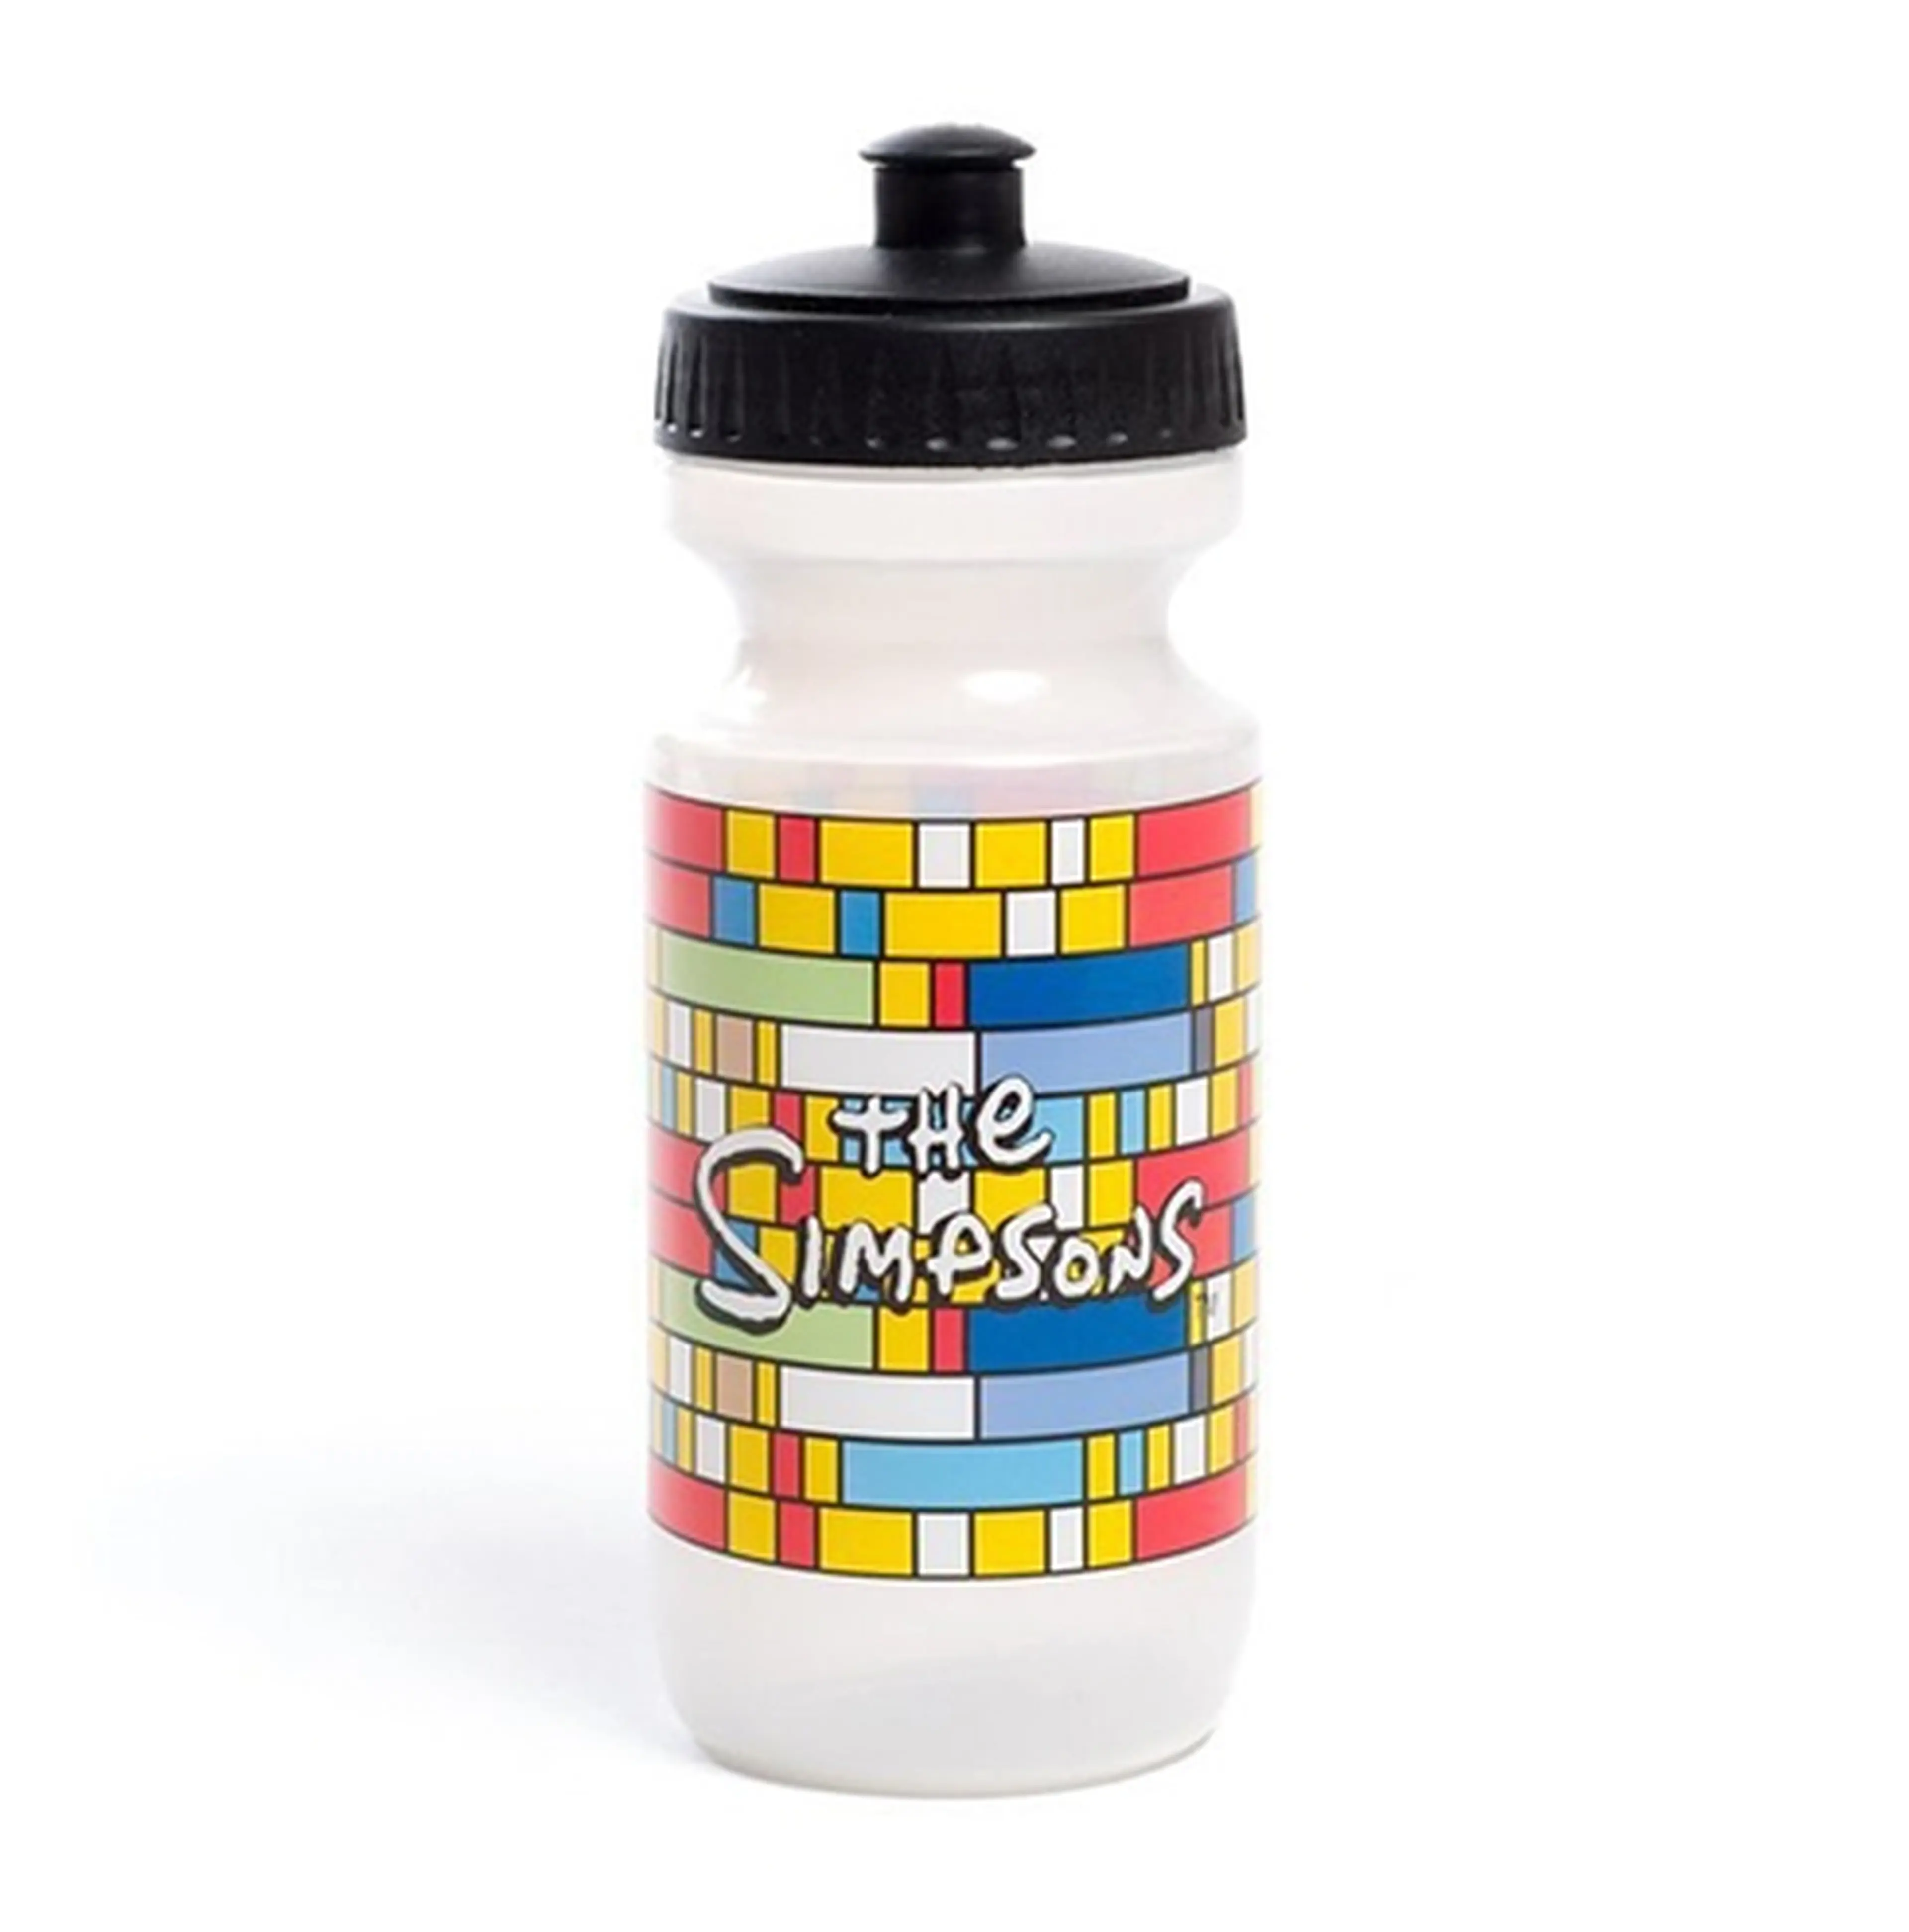 2. THE SIMPSONS X STATE BICYCLE CO. BOTTLE